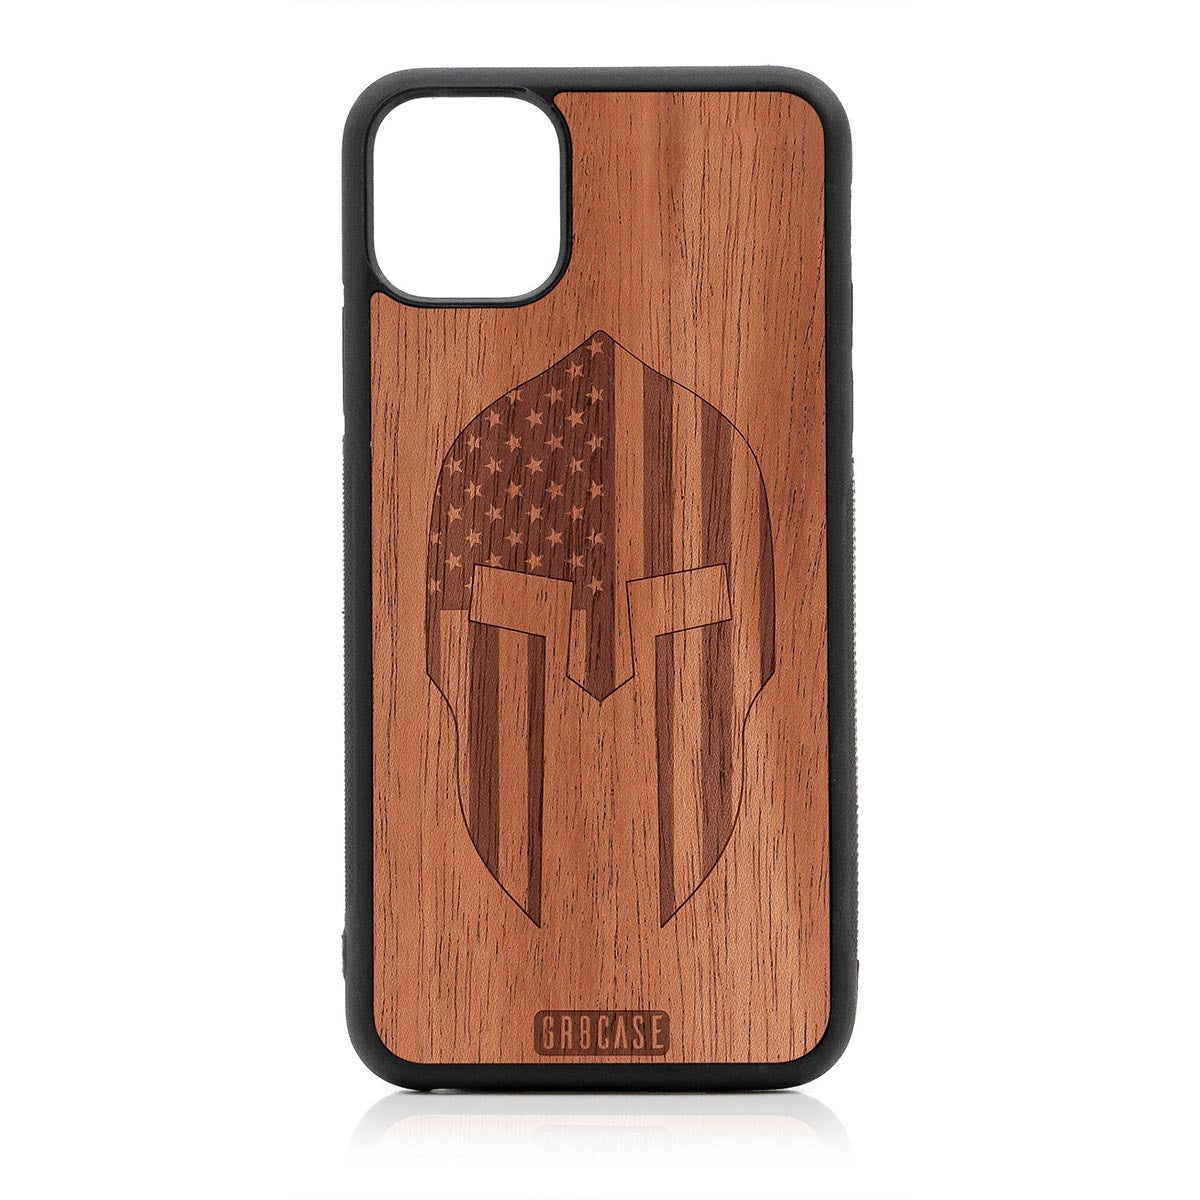 USA Spartan Helmet Design Wood Case For iPhone 11 Pro Max